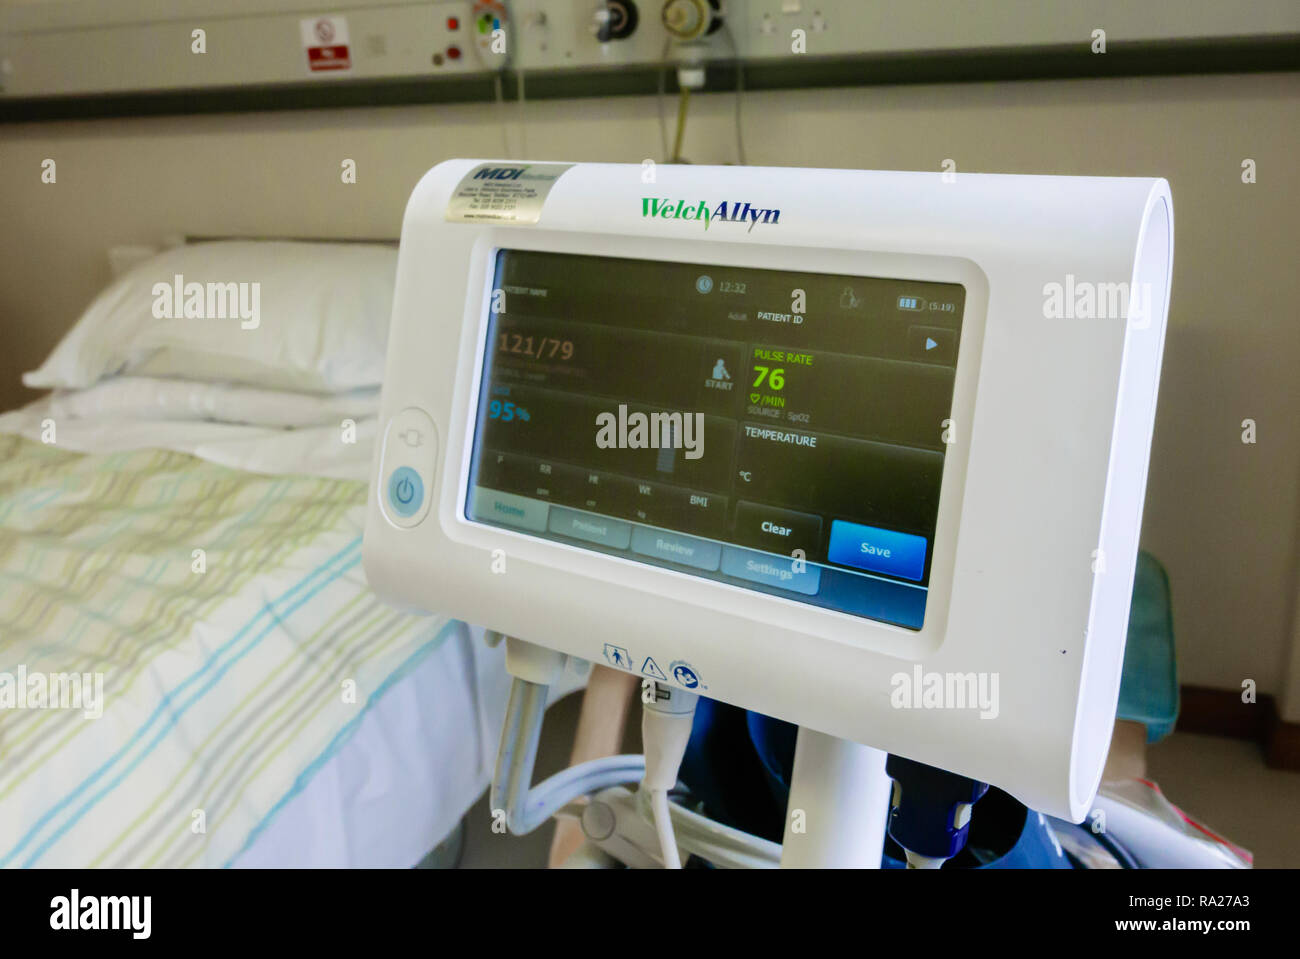 WelchAllyn blood pressure monitor in a hospital ward showing a normal blood pressure of 121/79, and a blood saturation level of 95%. Stock Photo